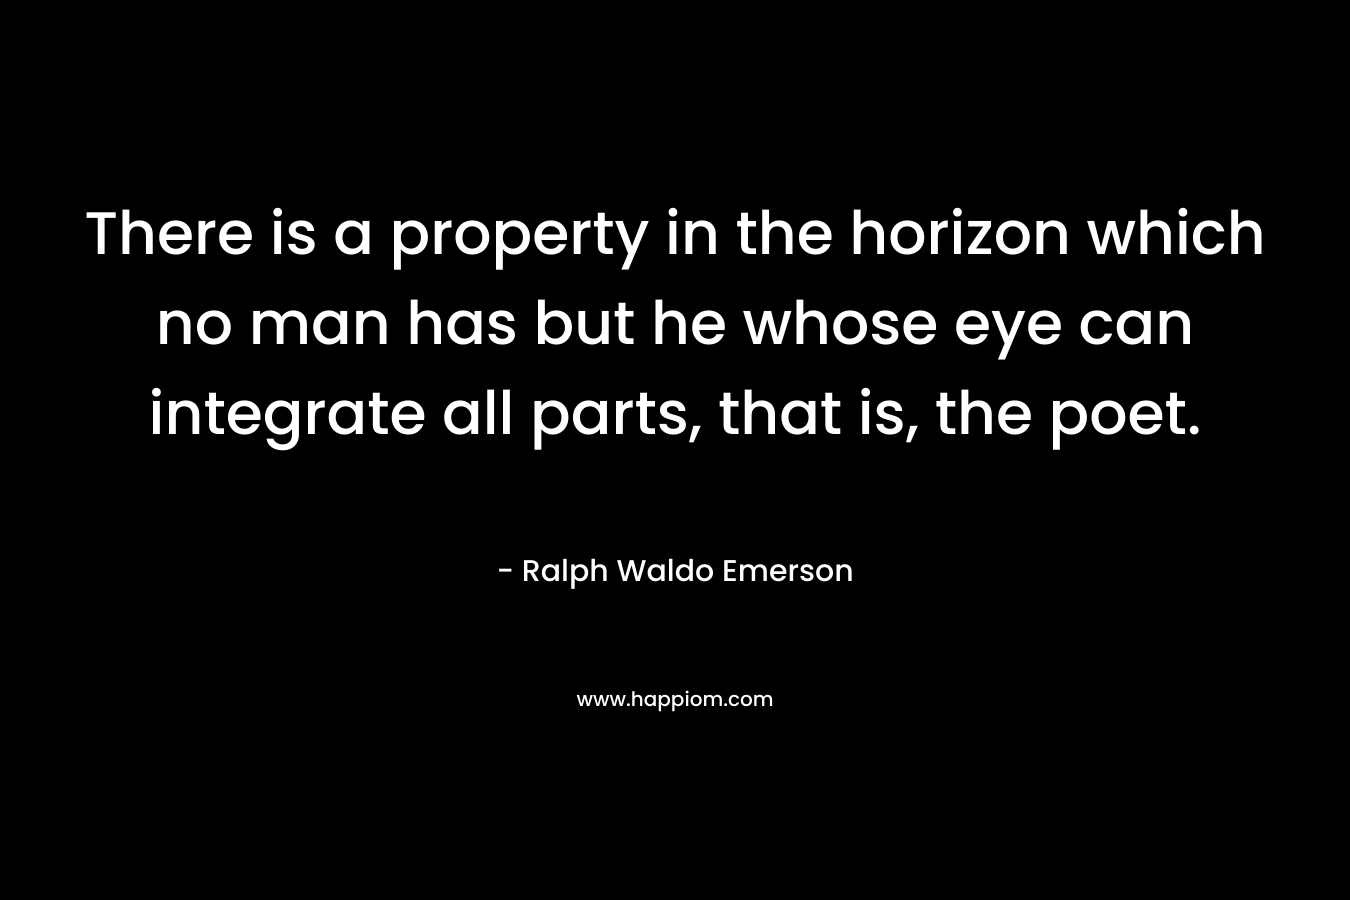 There is a property in the horizon which no man has but he whose eye can integrate all parts, that is, the poet.